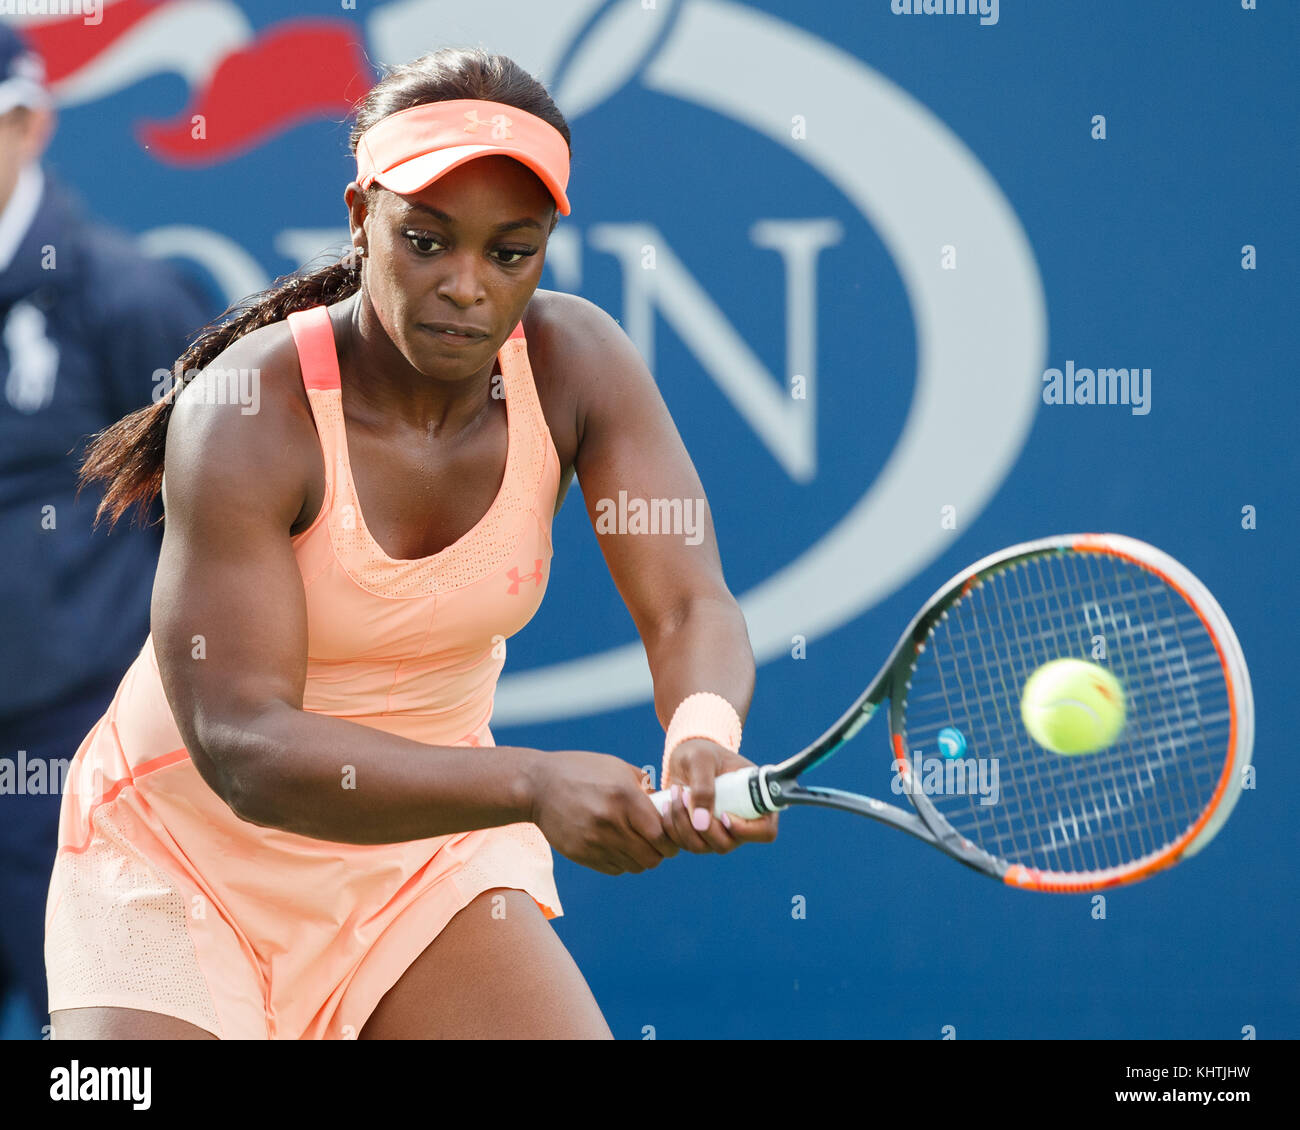 American tennis player SLOANE STEPHENS (USA) hitting a backhand shot during women's singles match at US Open 2017 Tennis Championship, New York City,  Stock Photo